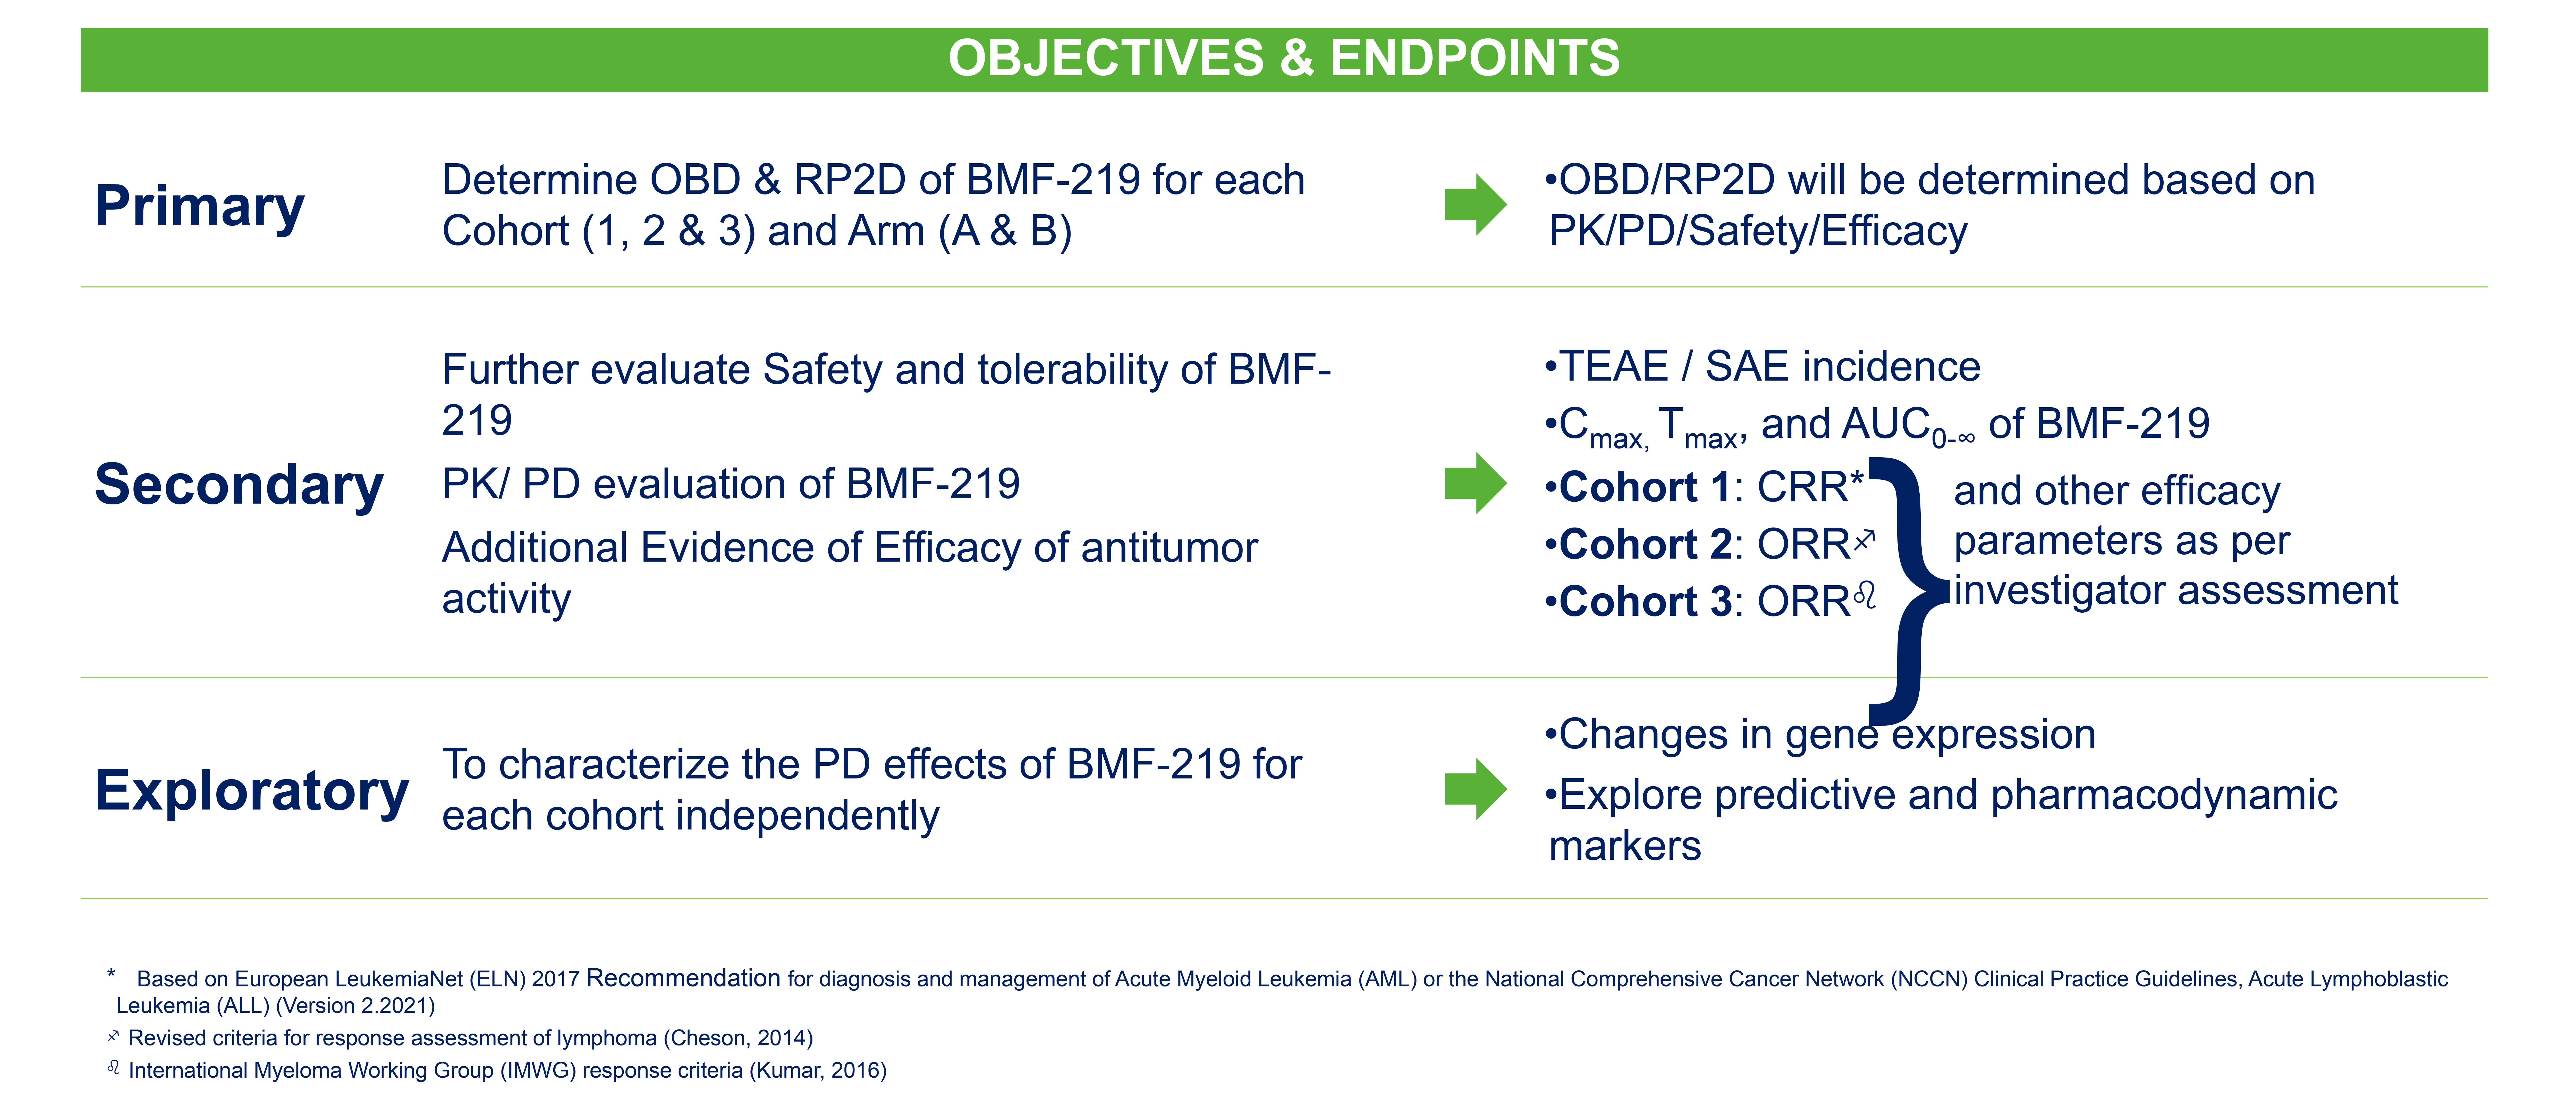 COVALENT-101-OBJECTIVES & ENDPOINTS